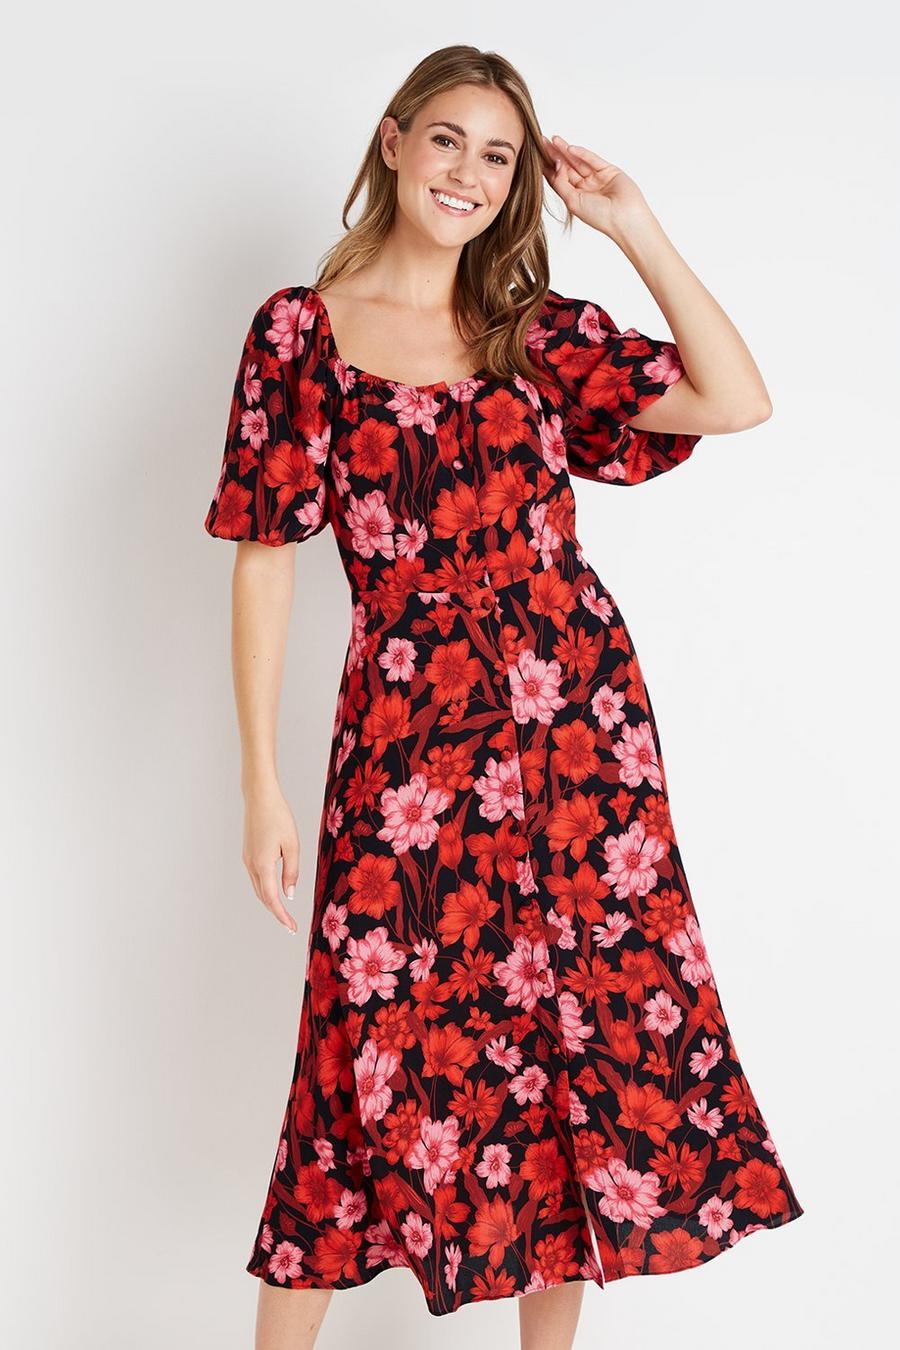 Black and Red Floral Square Neck Dress